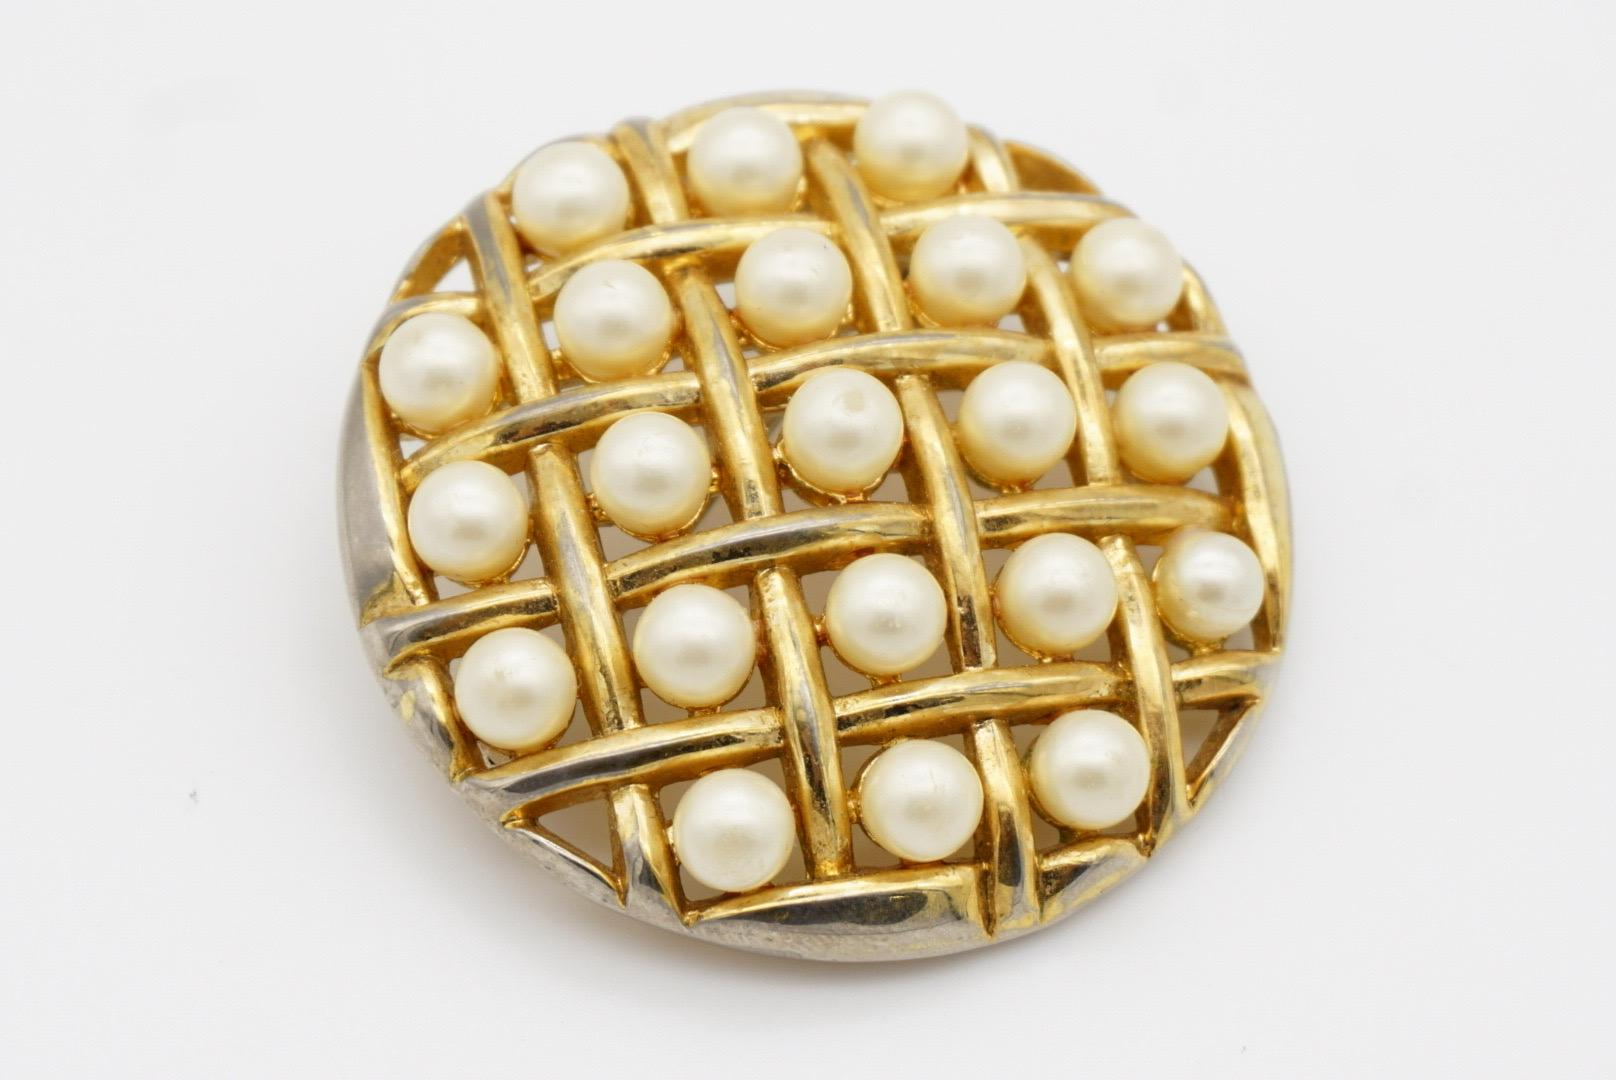 Crown Trifari 1950s Round Circle White Pearls Openwork Criss Cross Gold Brooch For Sale 3